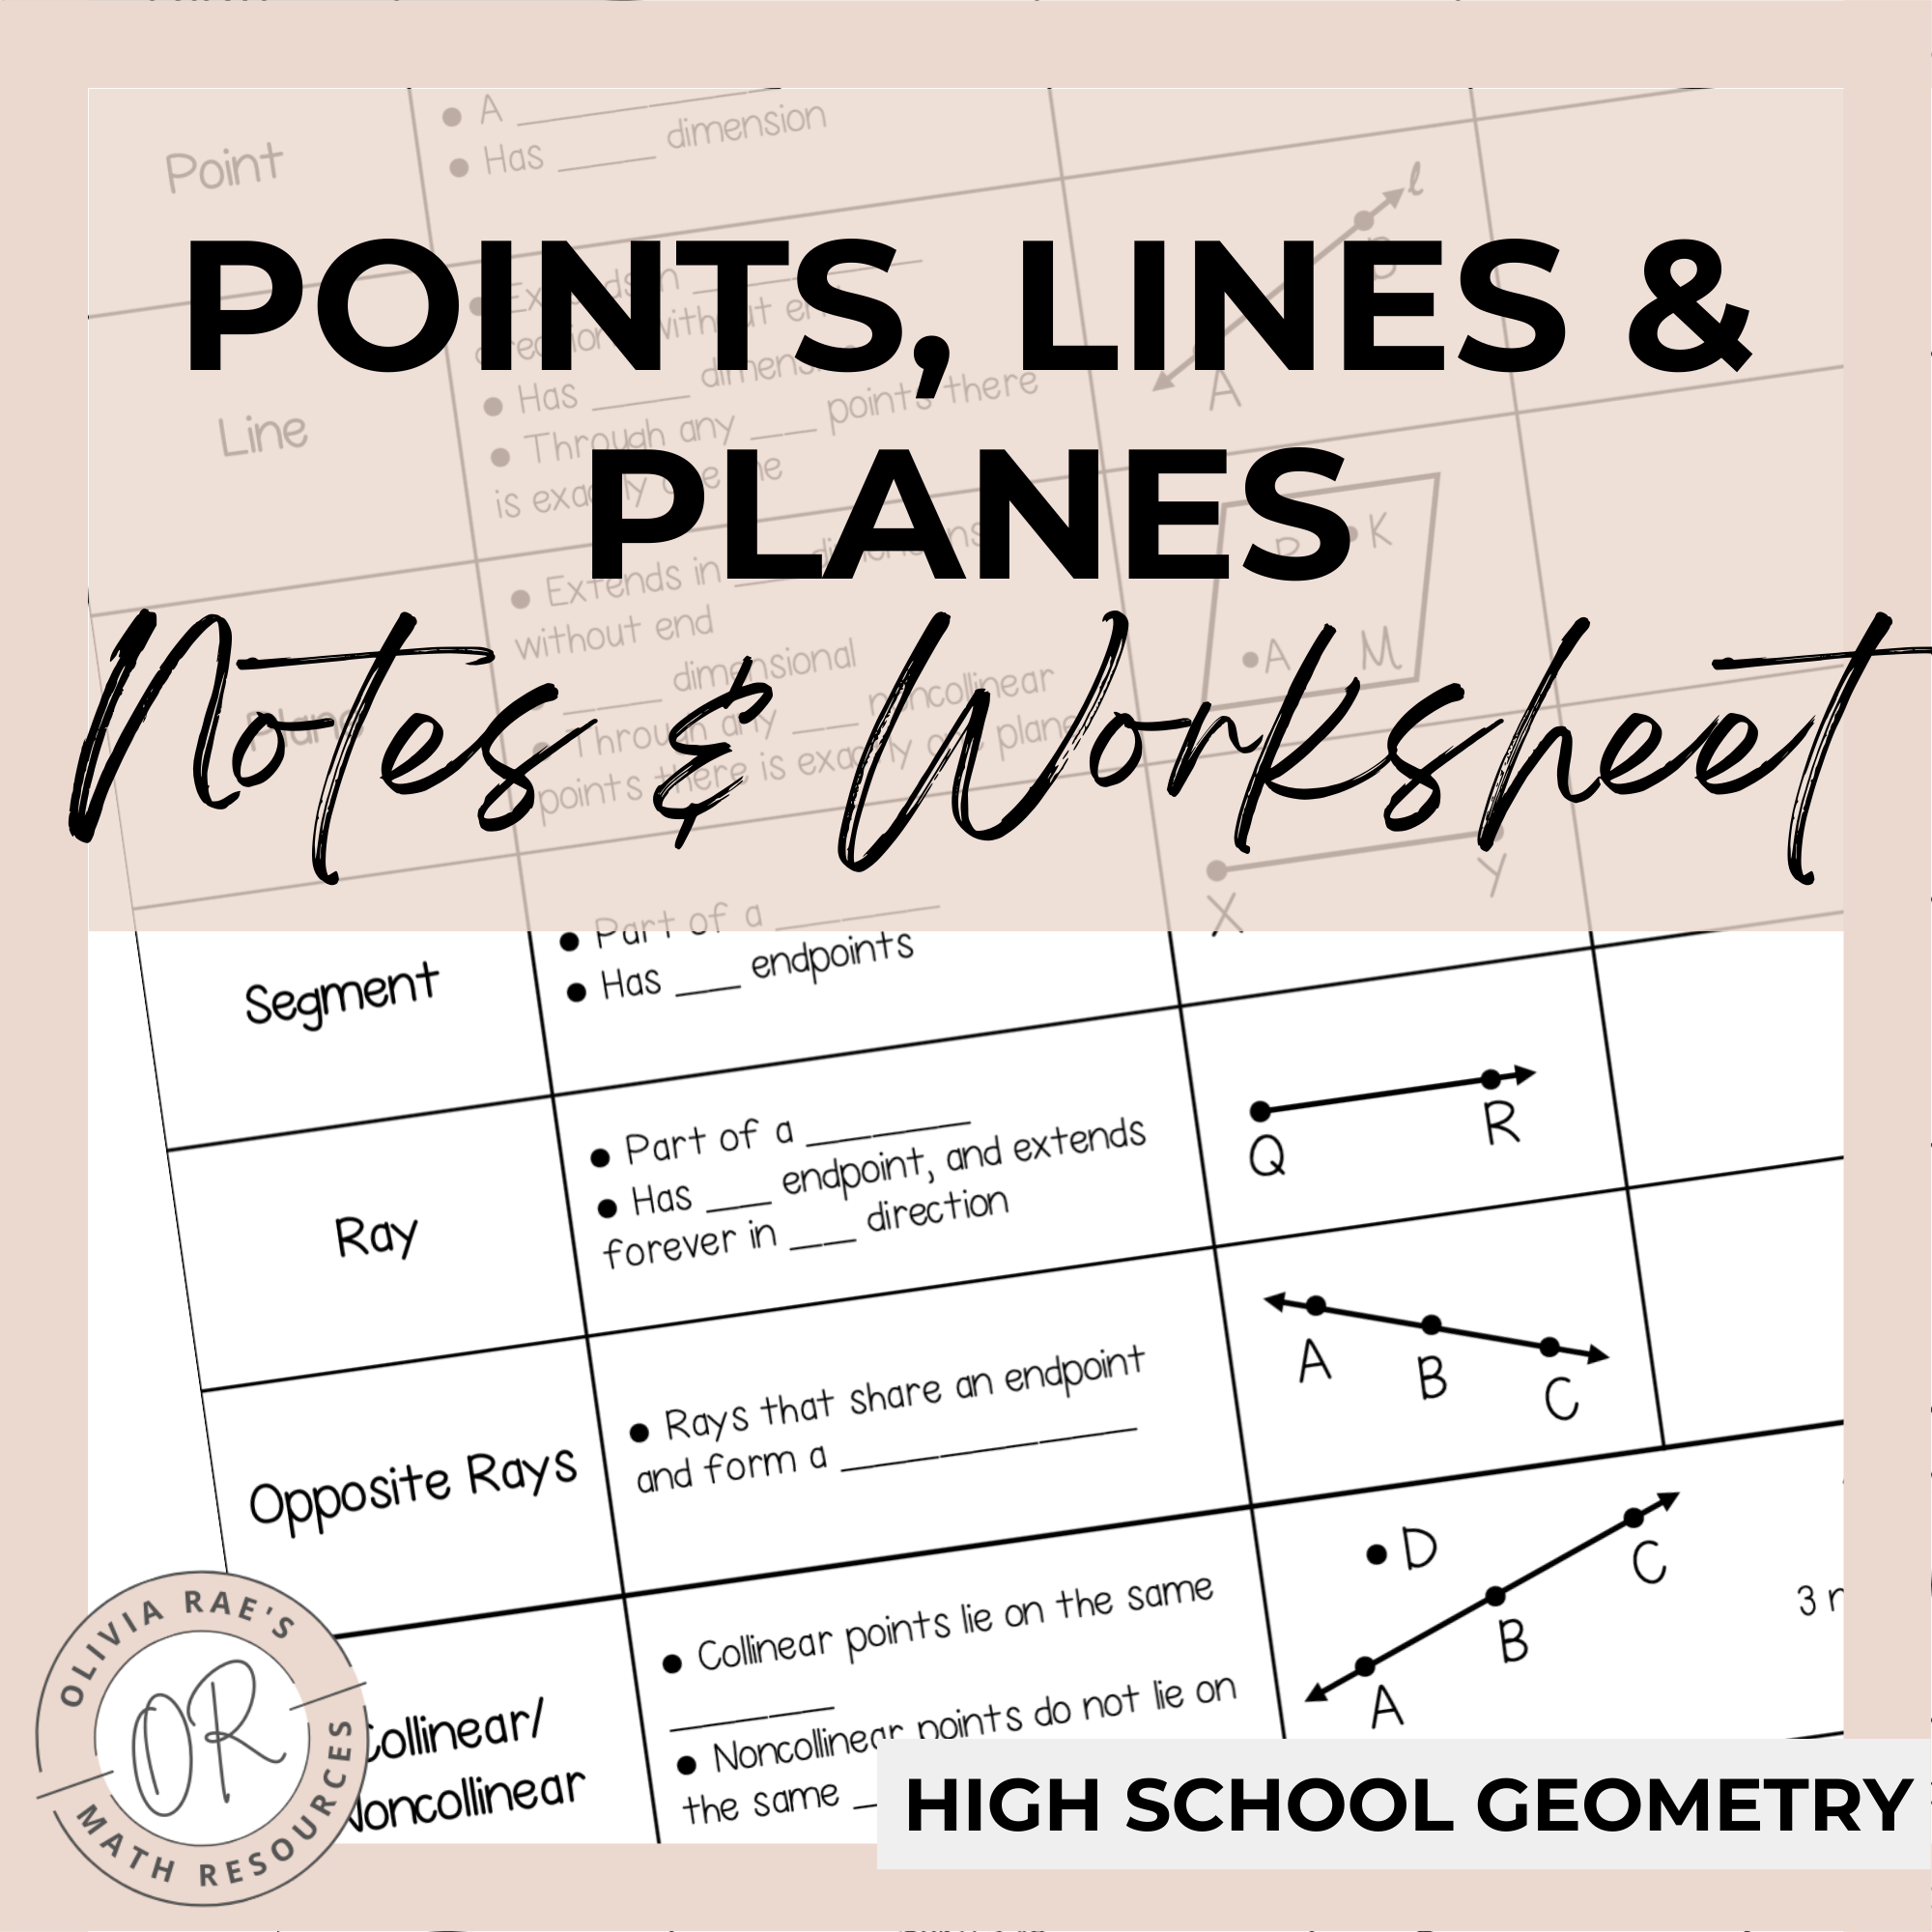 Points, Lines and Planes Notes & Worksheet